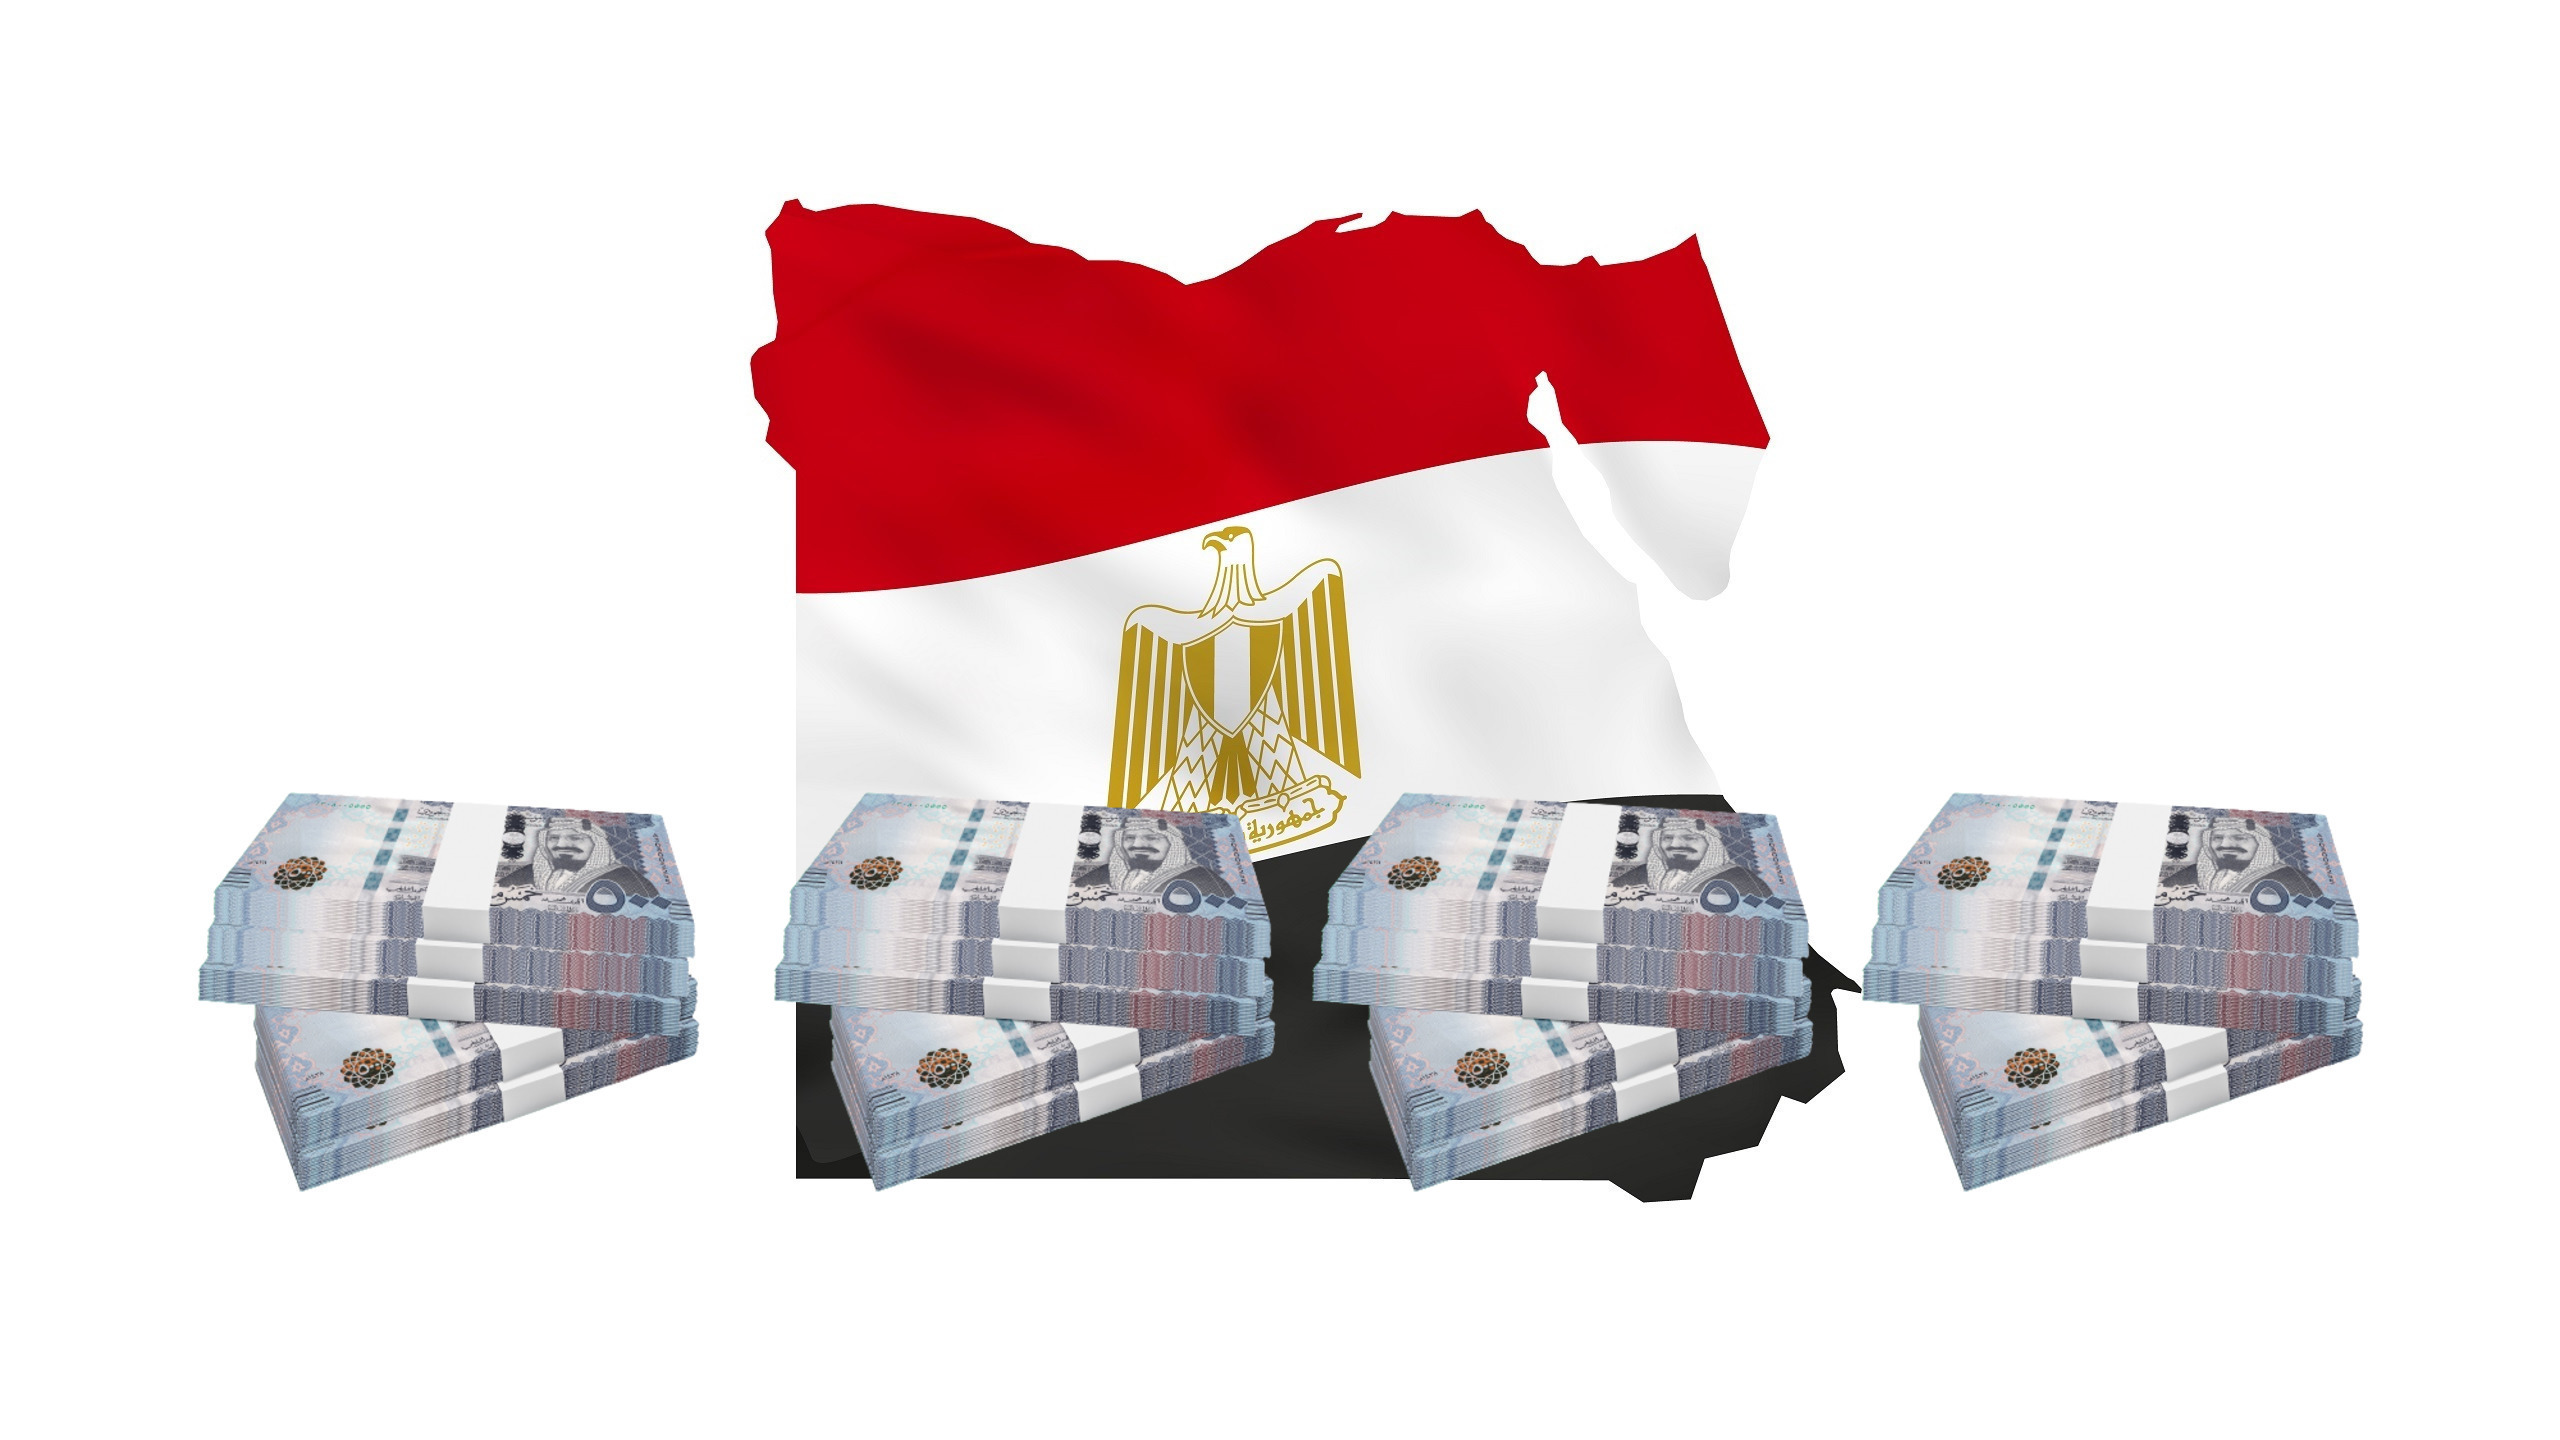 Saudi Fund Invests $1.3B in Egyptian Companies